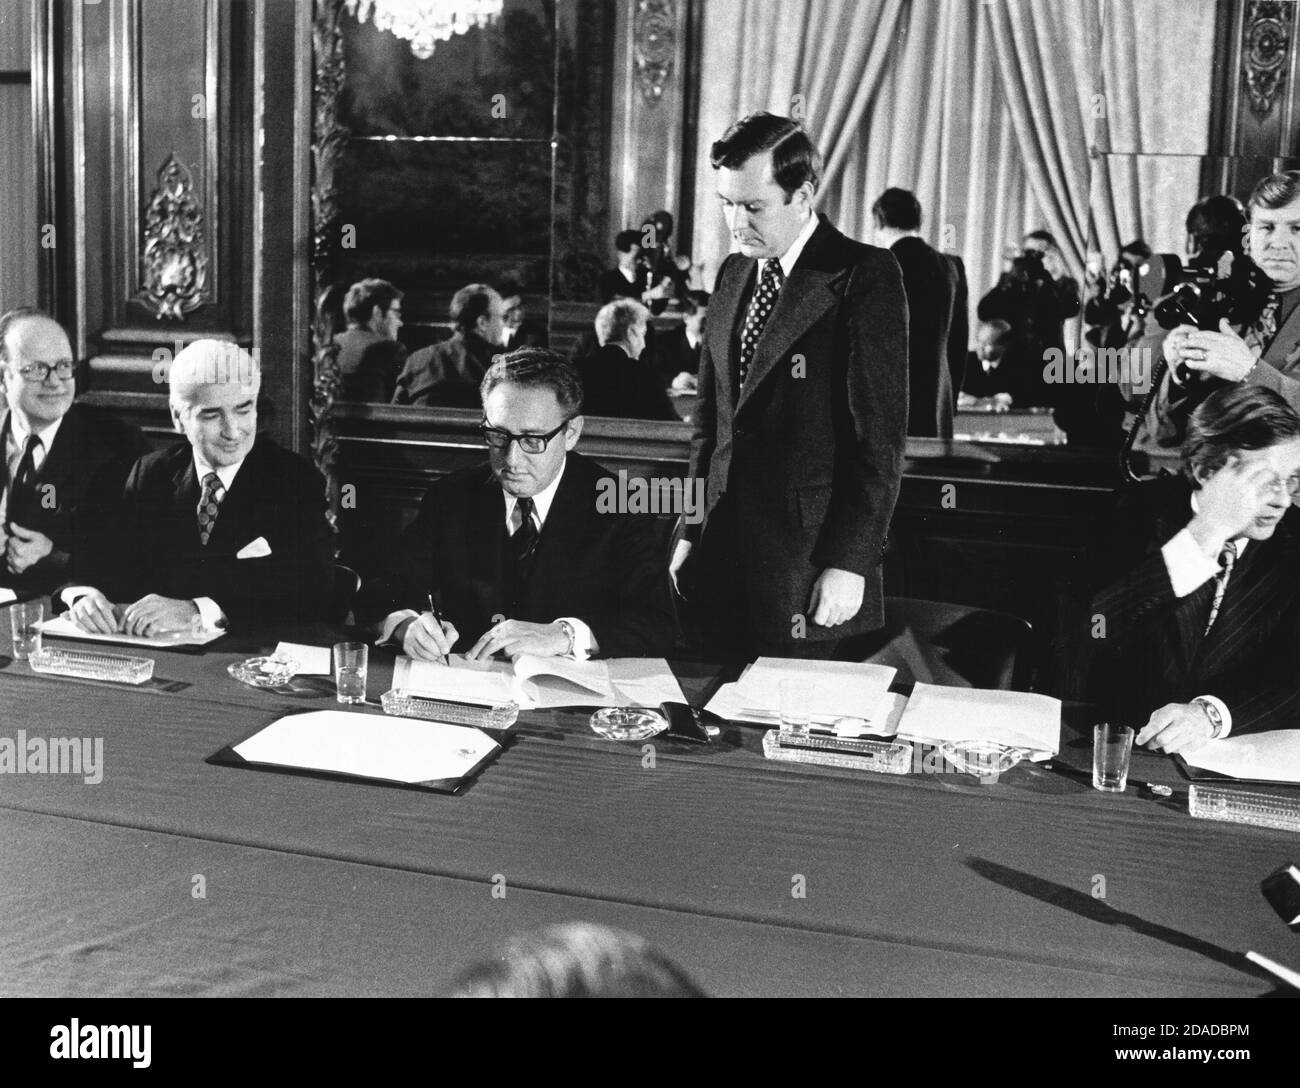 In this photo released by the White House, Assistant to the President (Nixon) for National Security Affairs Henry A. Kissinger, center, initials the Vietnam Peace Agreement in the International Conference Center in Paris, France on Tuesday, January 23, 1973.Mandatory Credit: Robert L. Knudsen / White House via CNP / MediaPunch Stock Photo